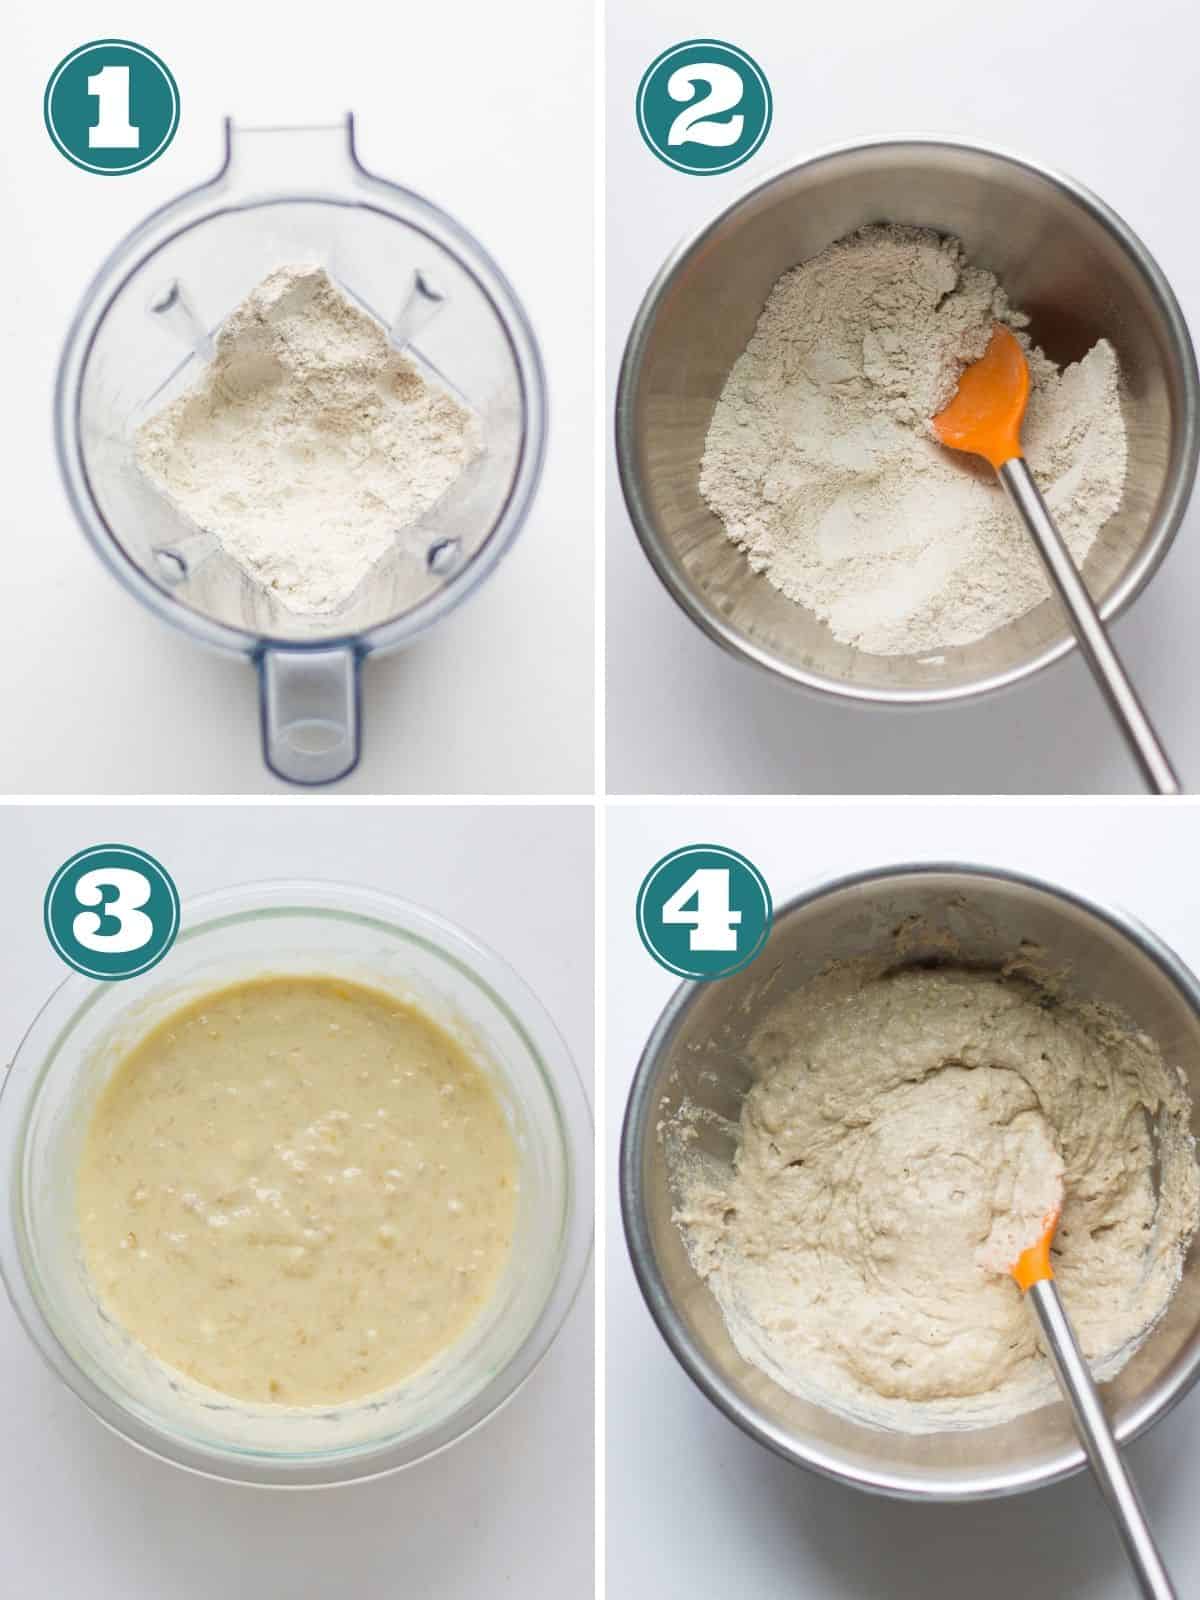 a four image collage showing step by step instructions on how to make the cake batter.